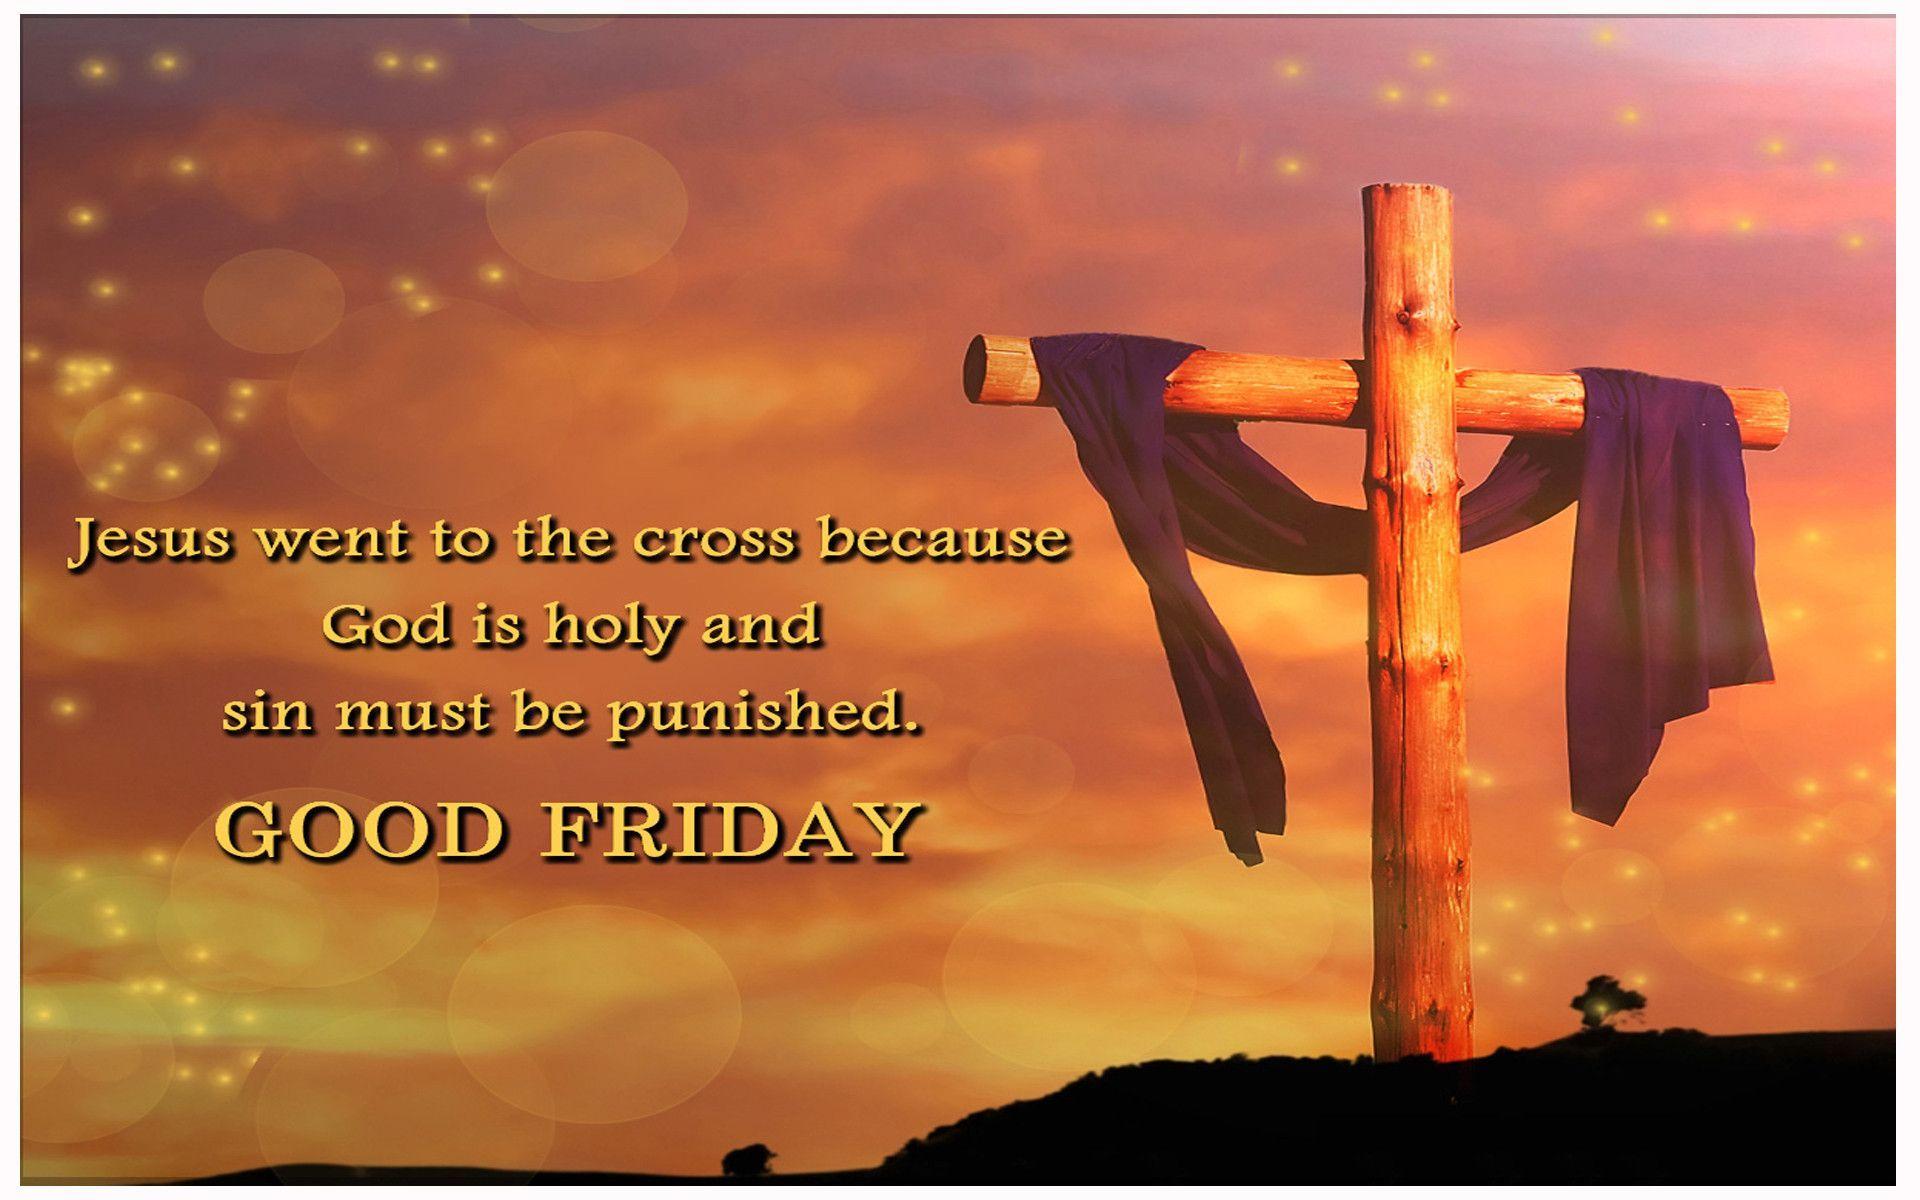 Happy Good Friday Image 2019. Good Friday Photo Picture HD